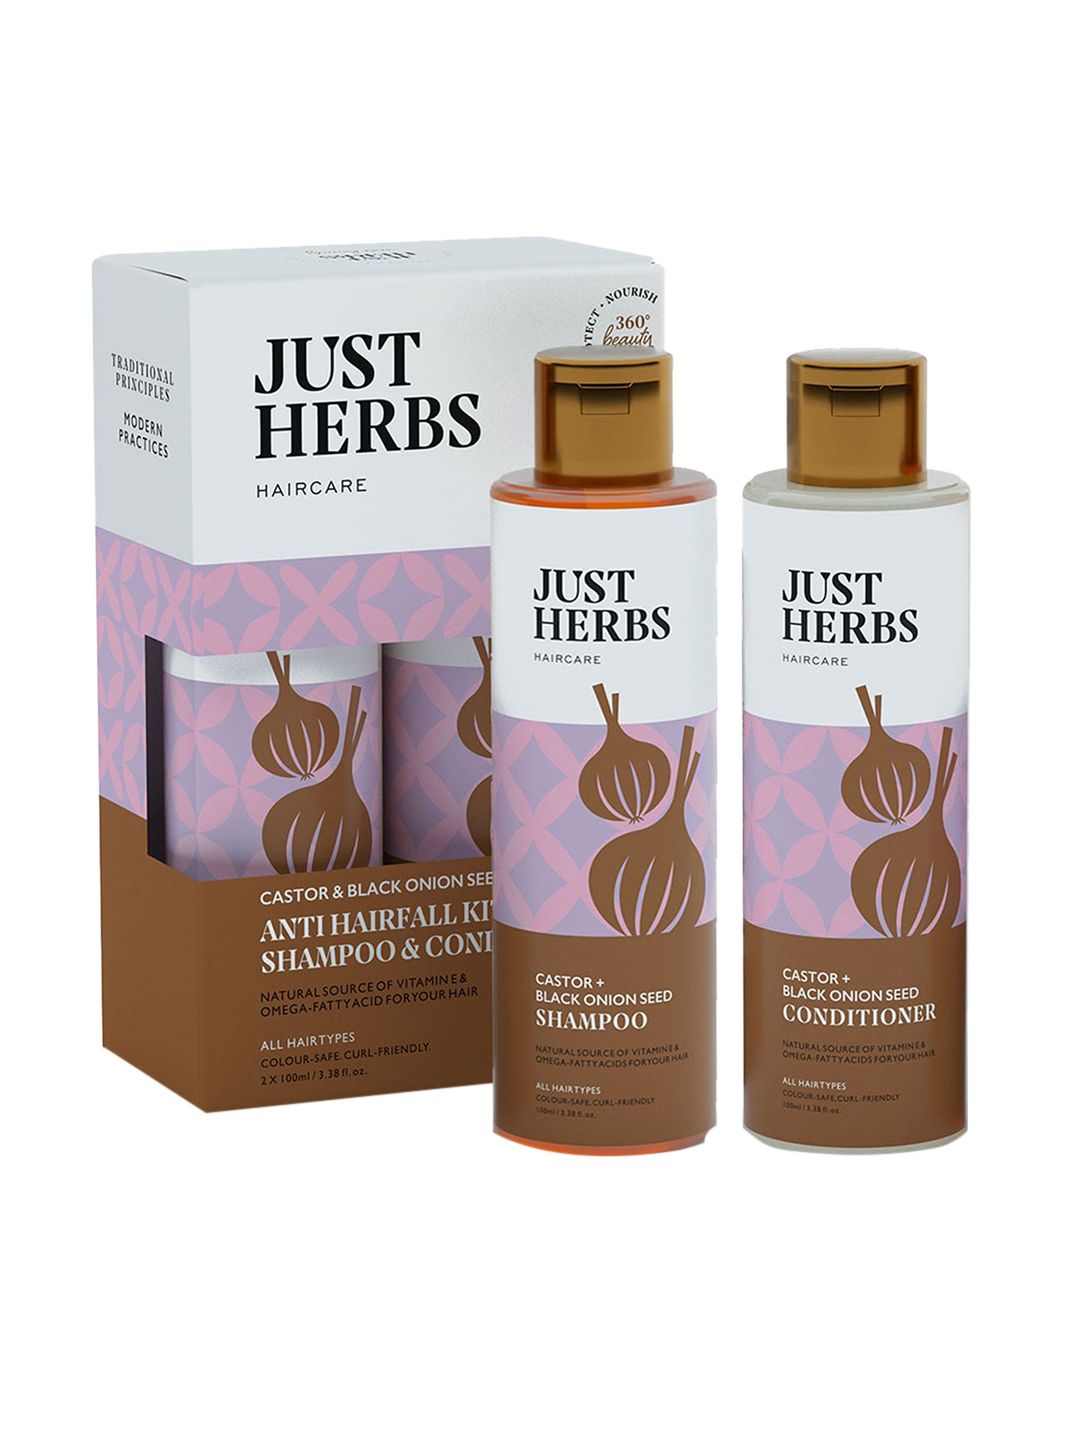 Just Herbs Set of Castor & Black Onion Seed Shampoo & Conditioner - 100 ml Each Price in India